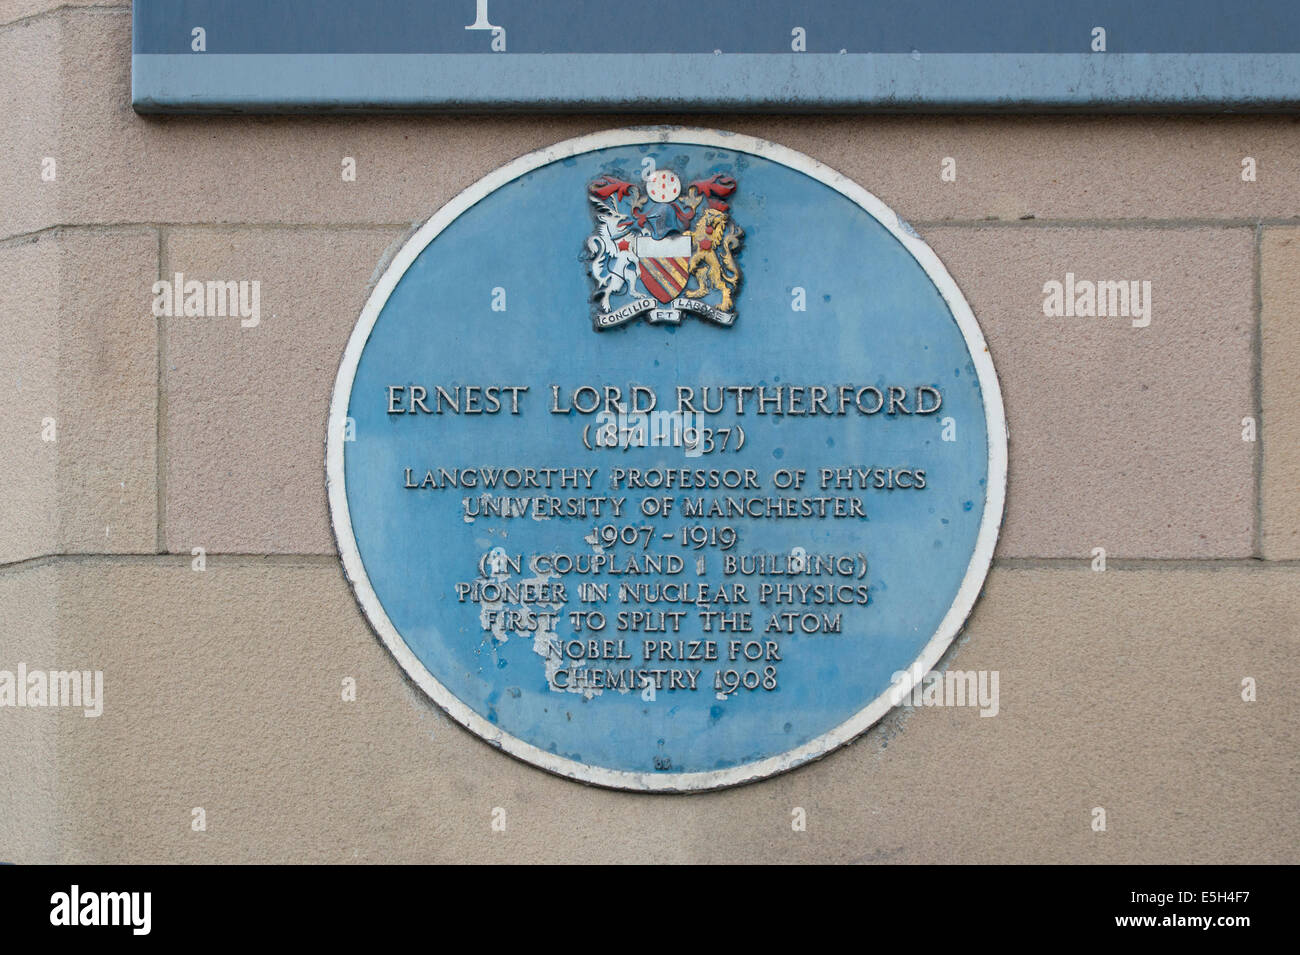 A plaque to commemorate Ernest Lord Rutherford, located in the University campus area (off Oxford Road) in Manchester. Stock Photo